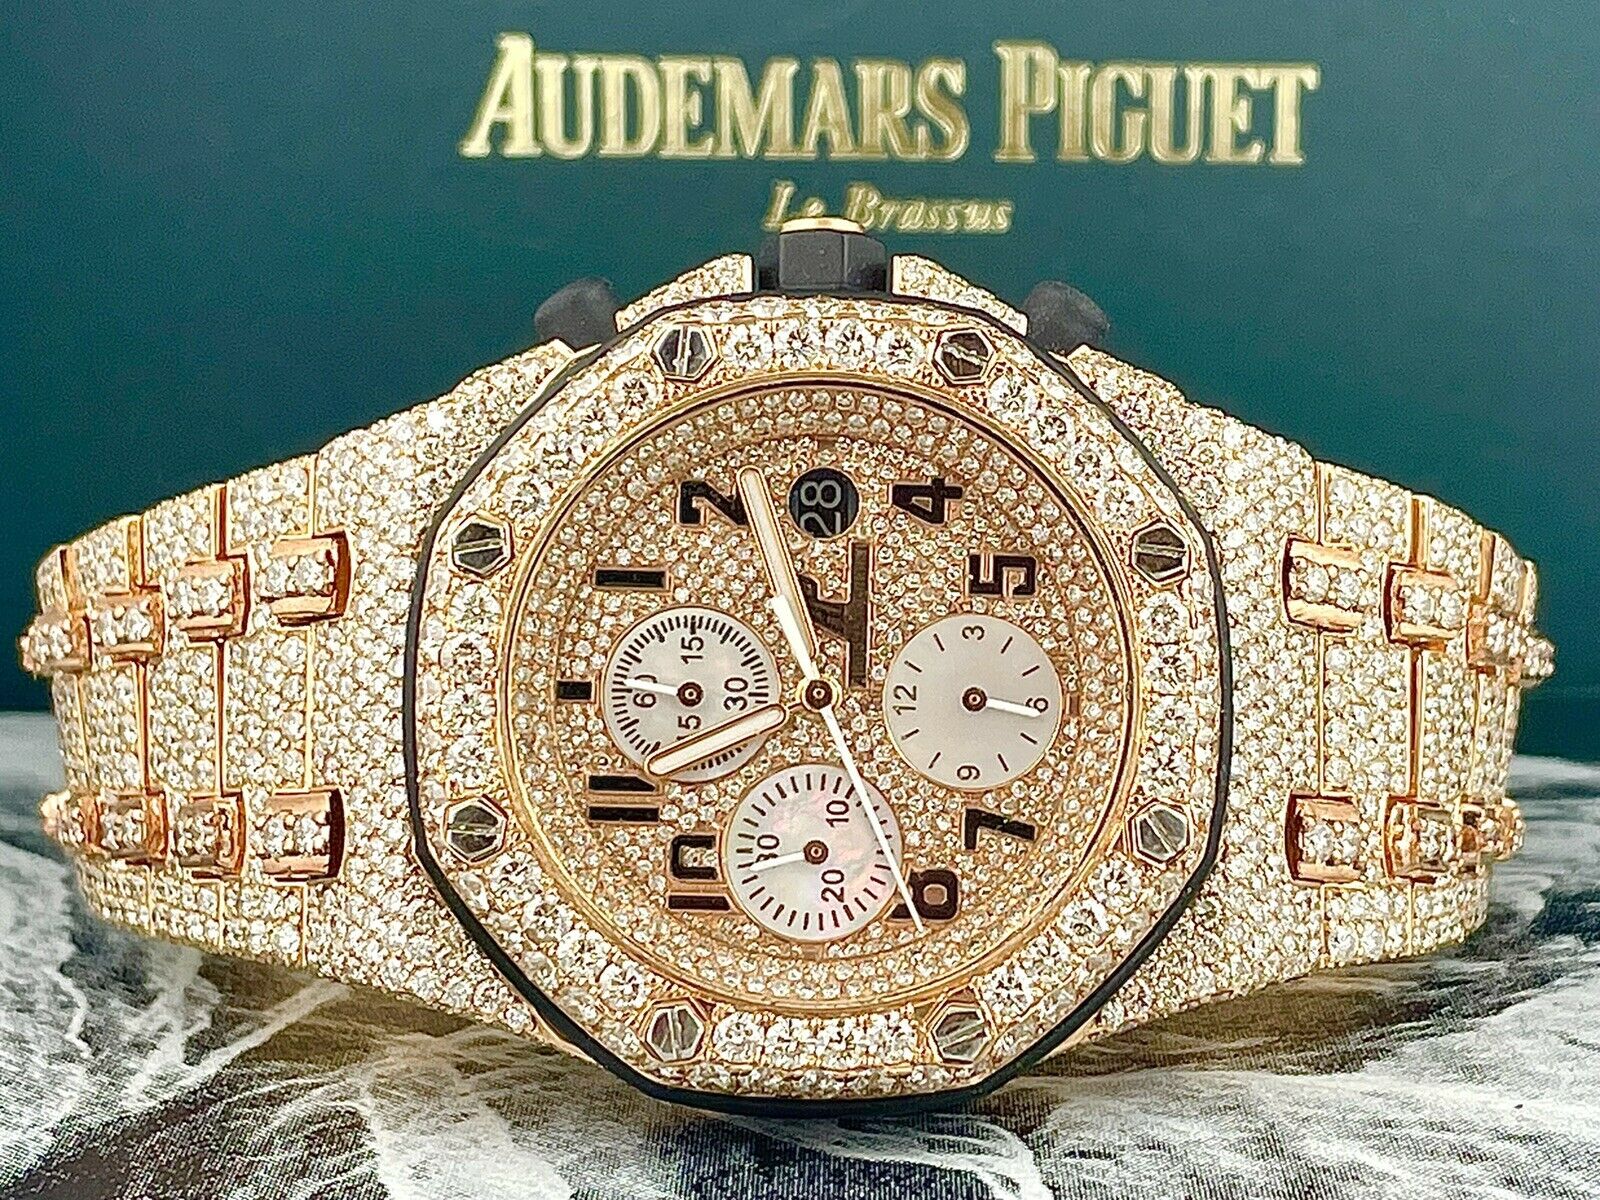 Audemars Piguet Royal Oak Offshore 42mm 18K Rose Gold Iced Out 30ct Diamonds Reference Number 25940OK.OO.D002CA.01-Iced Out Watches.